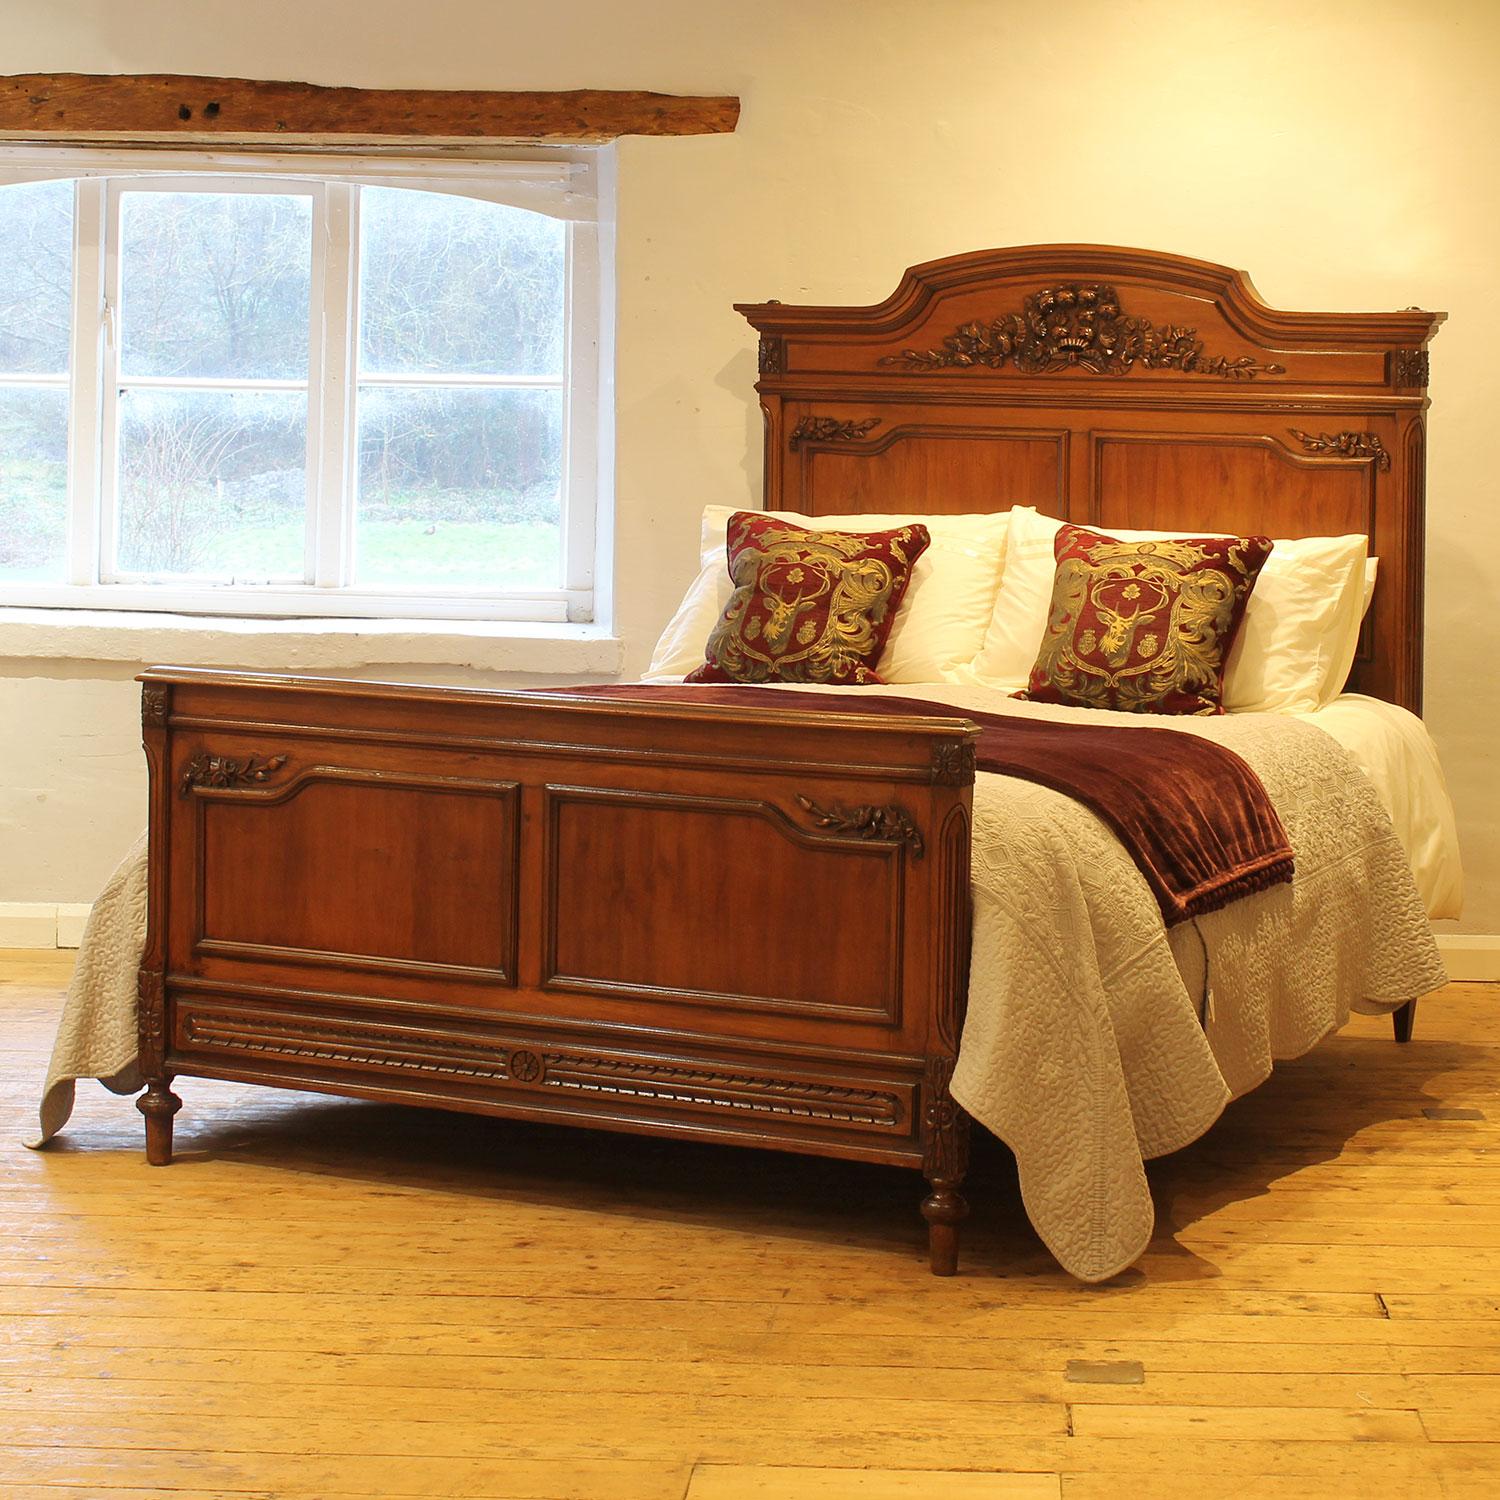 A fine example of a French bed from the early Twentieth Century with elegant shaping and fine carving.

This bed accepts a US Queen Size (or UK King Size), 5ft wide (60 in), base and mattress set.

The price includes a firm bed base for the bed